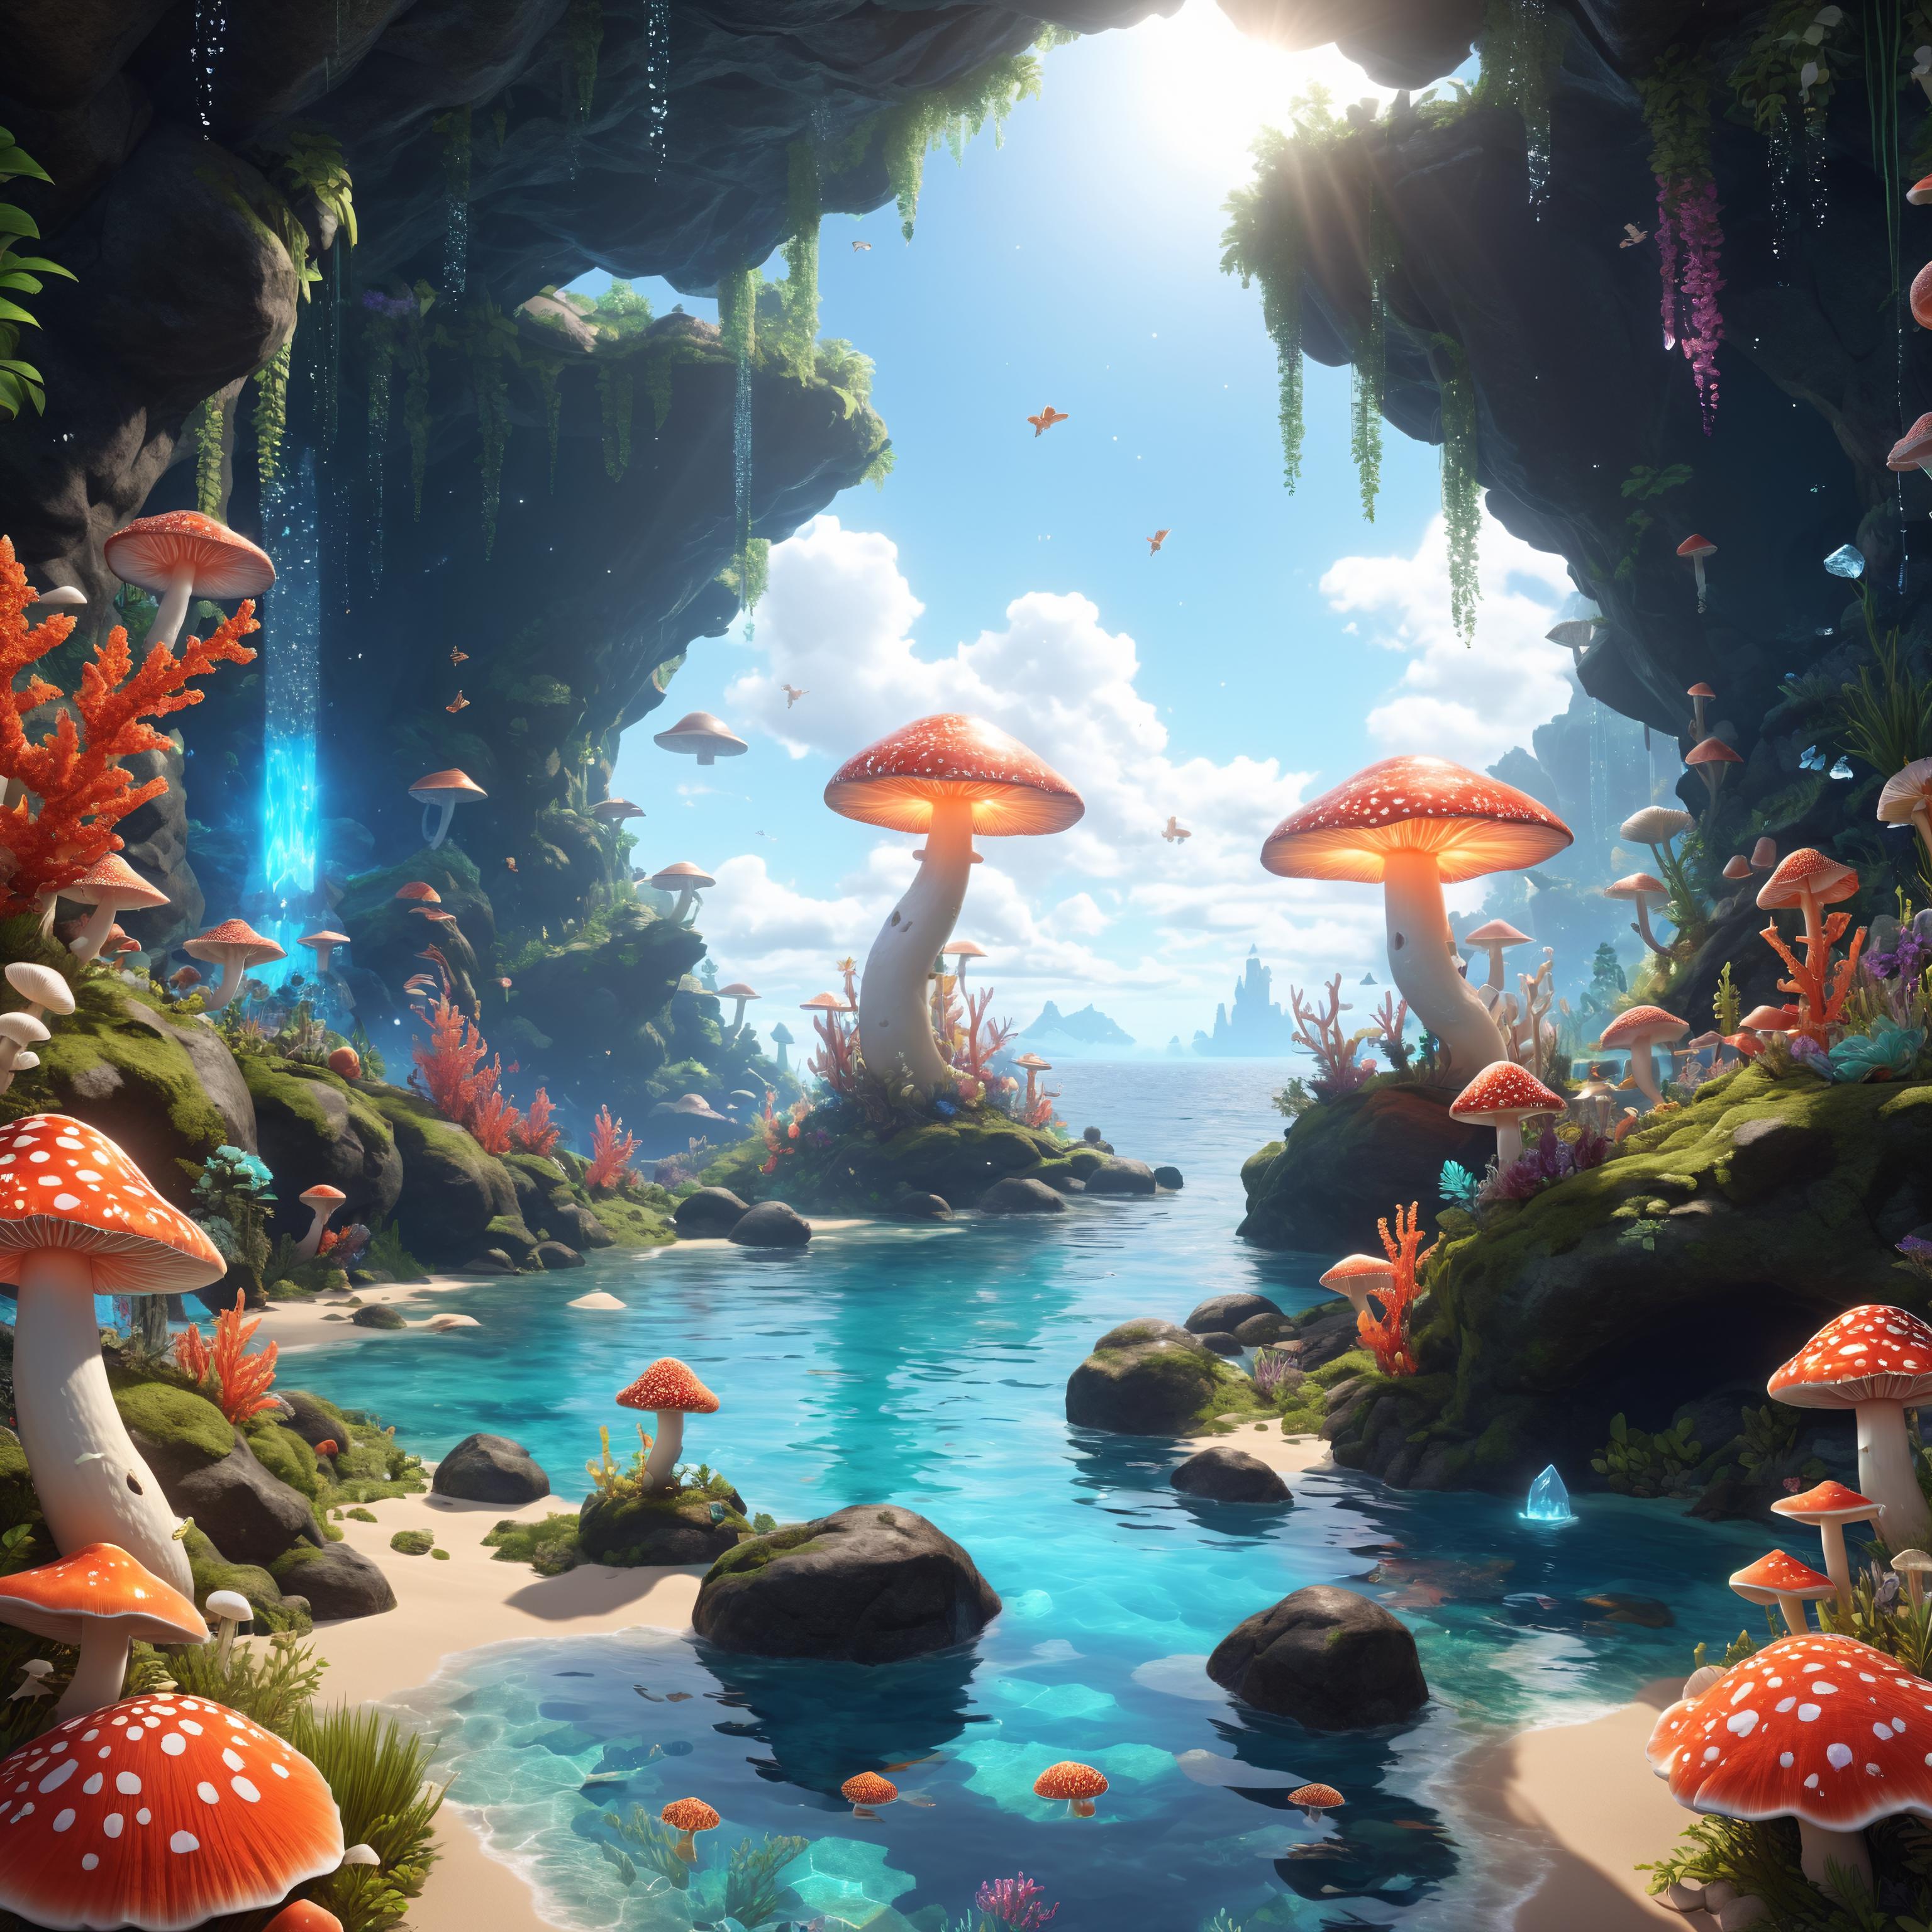 A beautiful, colorful and magical scene of a forest with a crystal blue river flowing through it, surrounded by mushrooms and other plants. The scene is bathed in sunlight, creating a vibrant and enchanting atmosphere.